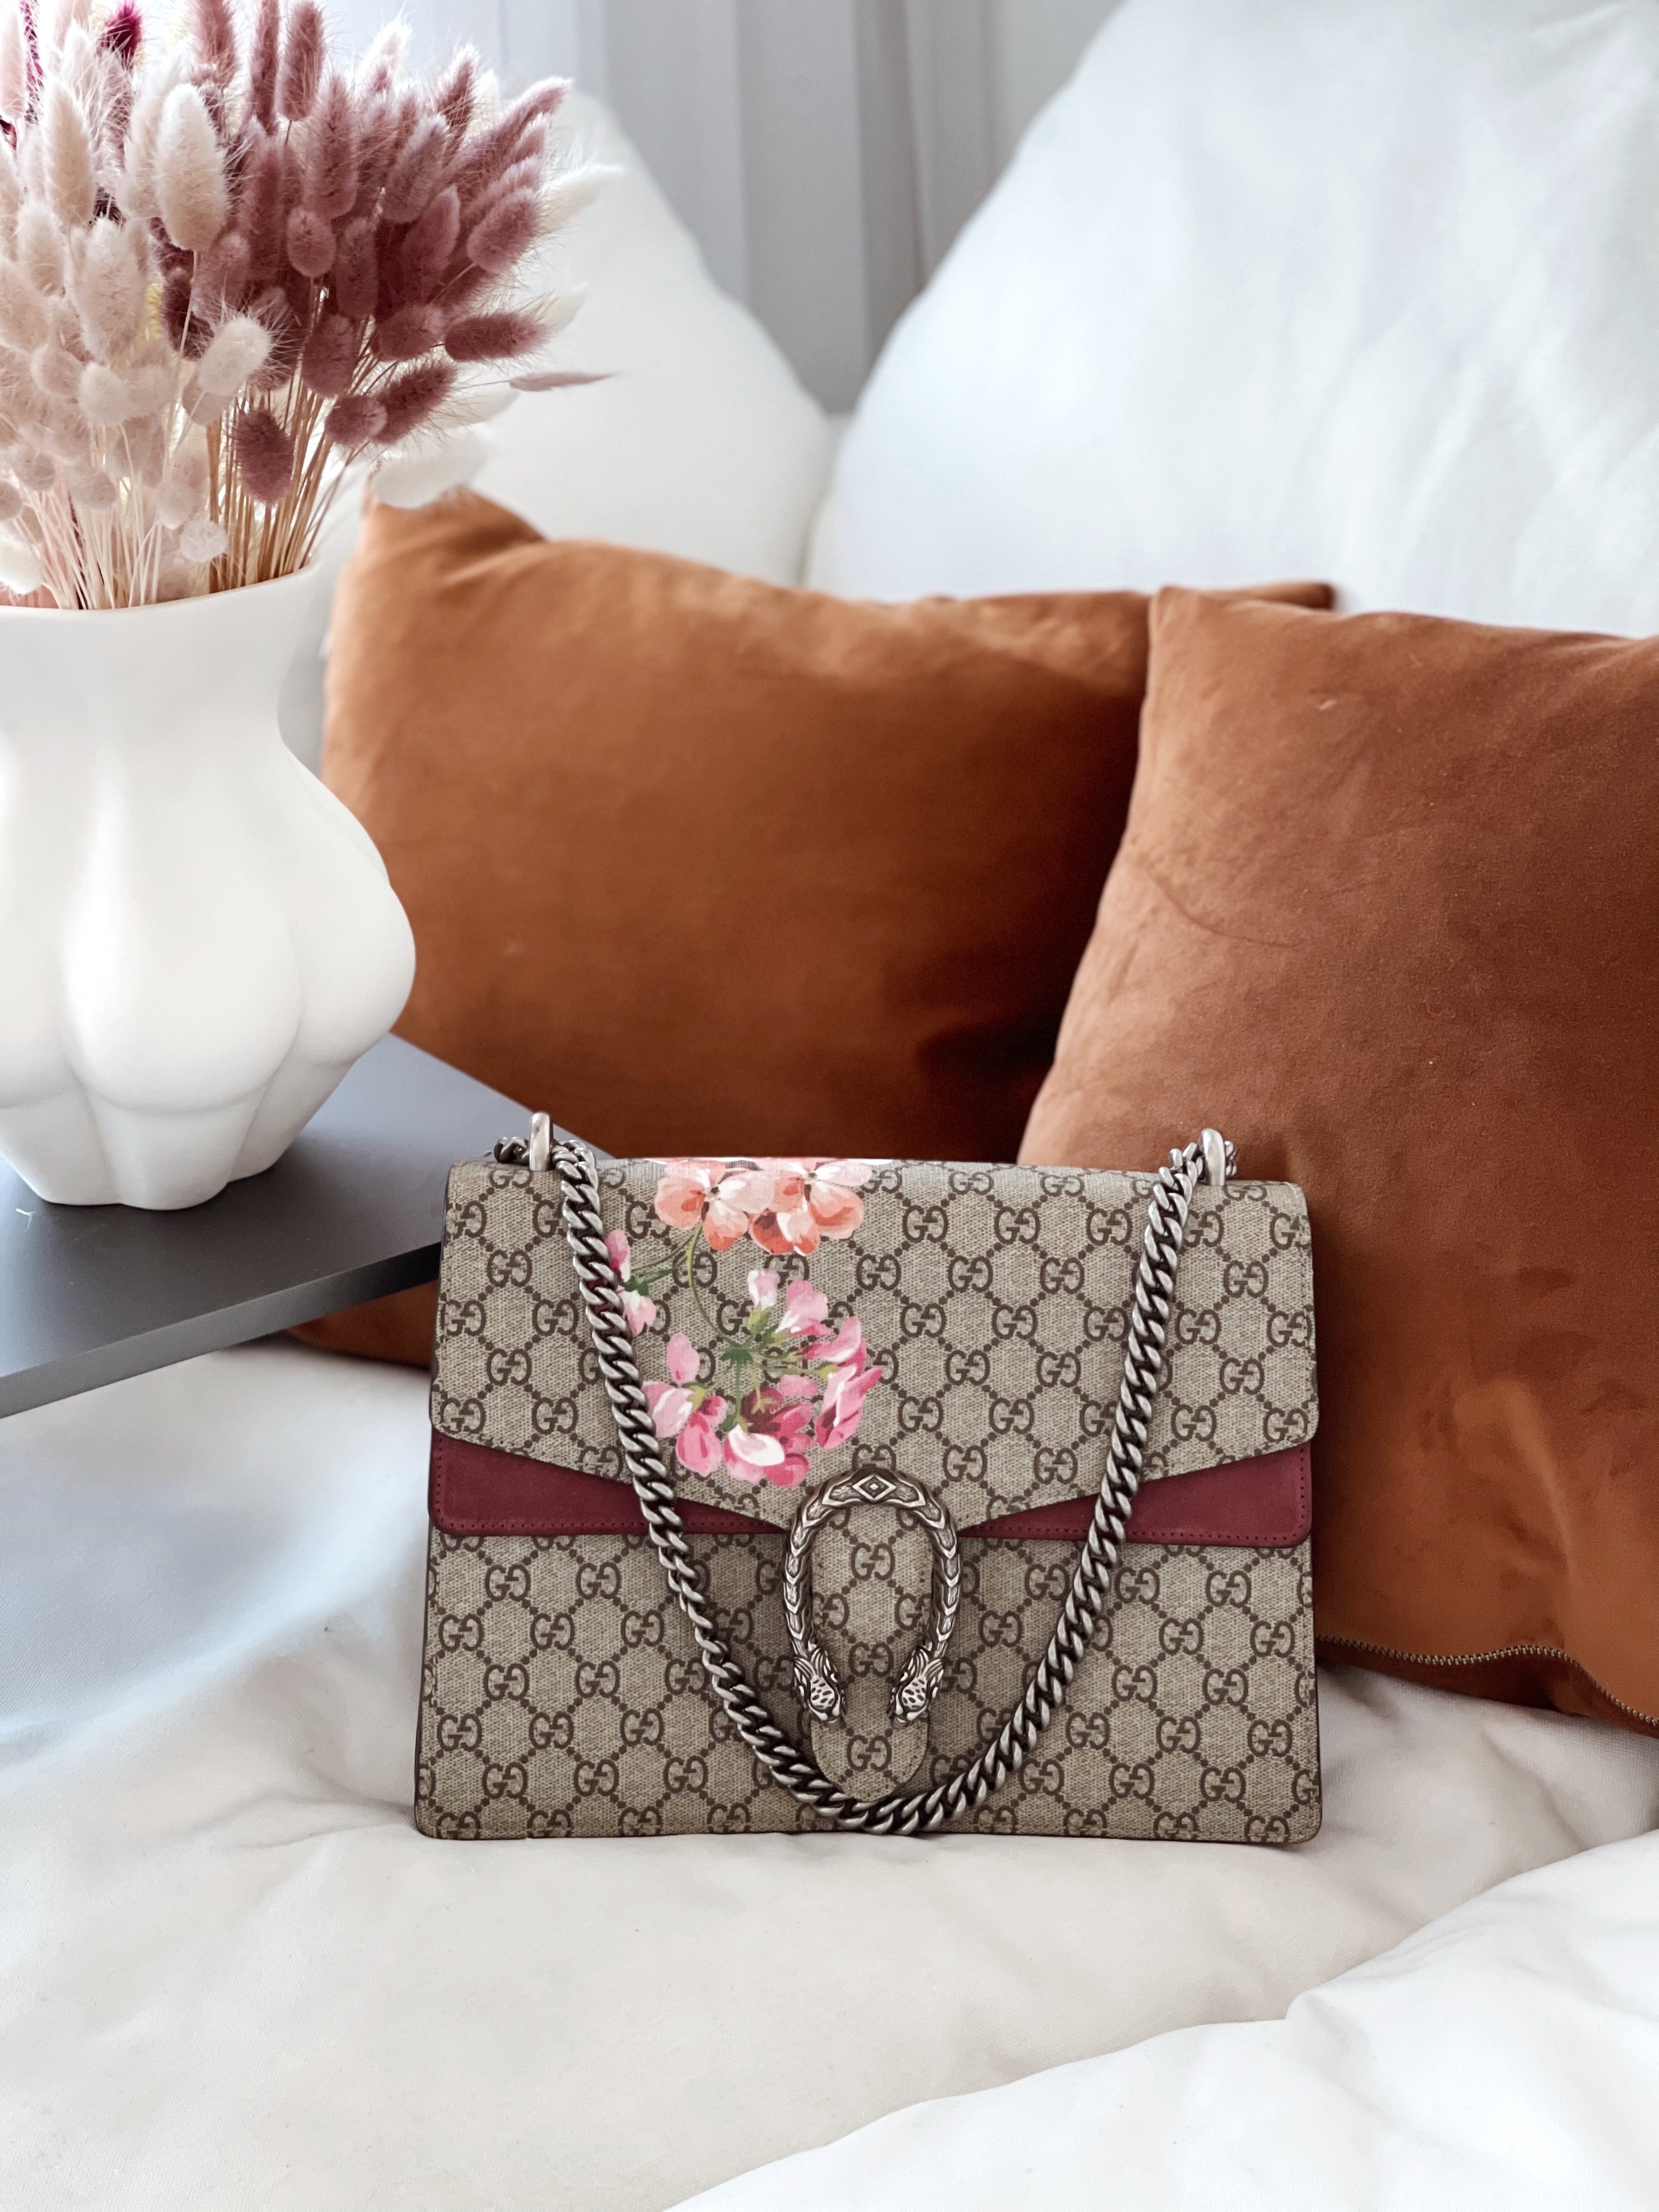 Gucci Re- Edition Dionysus GG Blooms Bag